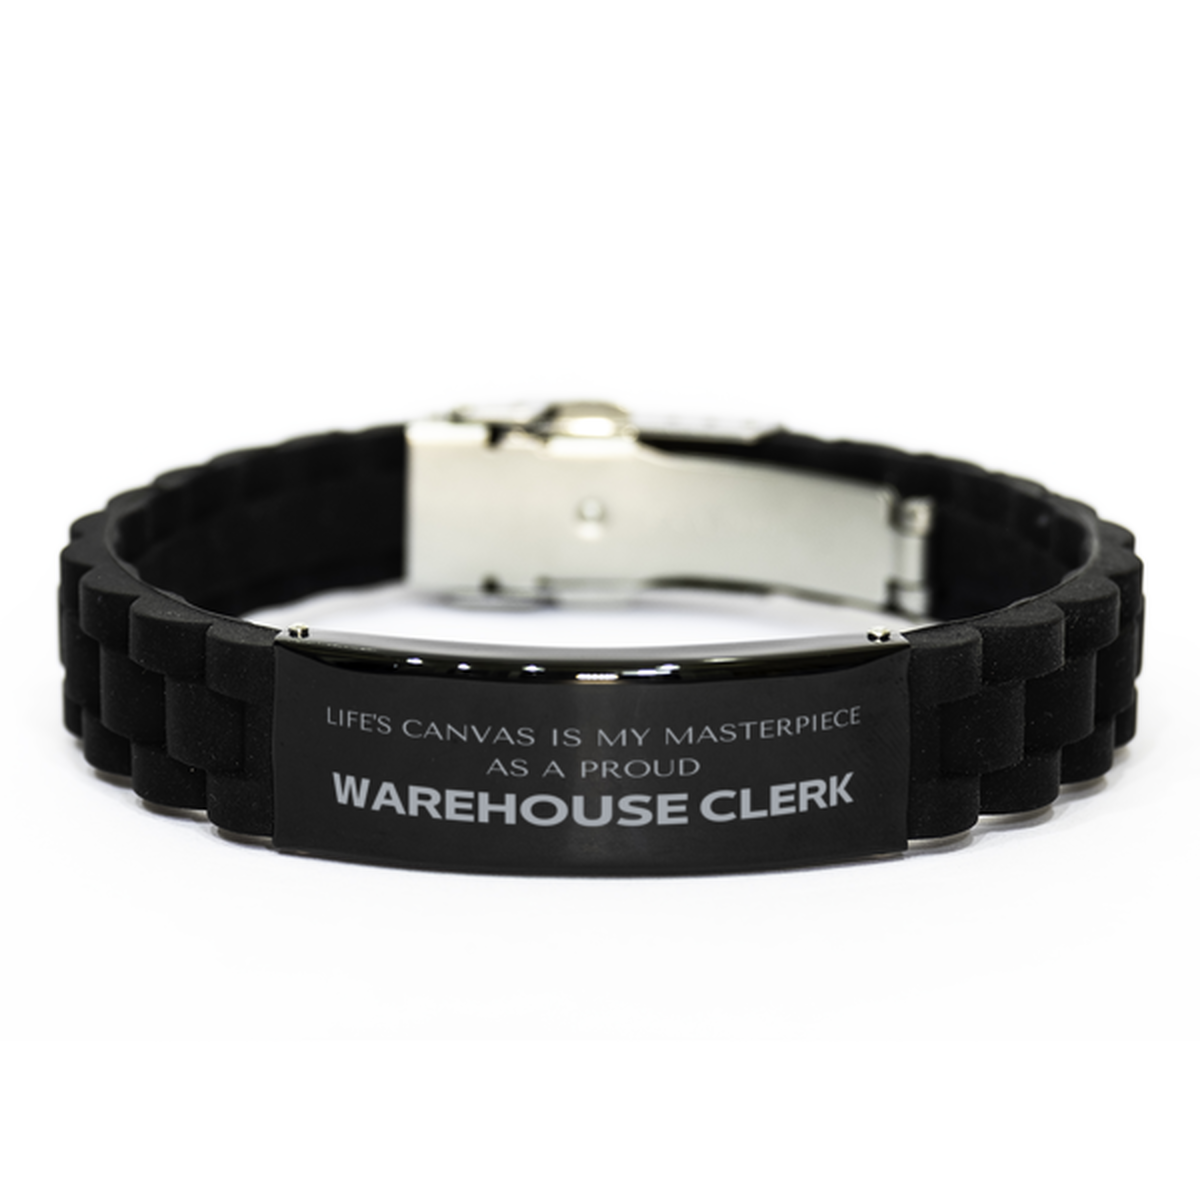 Proud Warehouse Clerk Gifts, Life's canvas is my masterpiece, Epic Birthday Christmas Unique Black Glidelock Clasp Bracelet For Warehouse Clerk, Coworkers, Men, Women, Friends